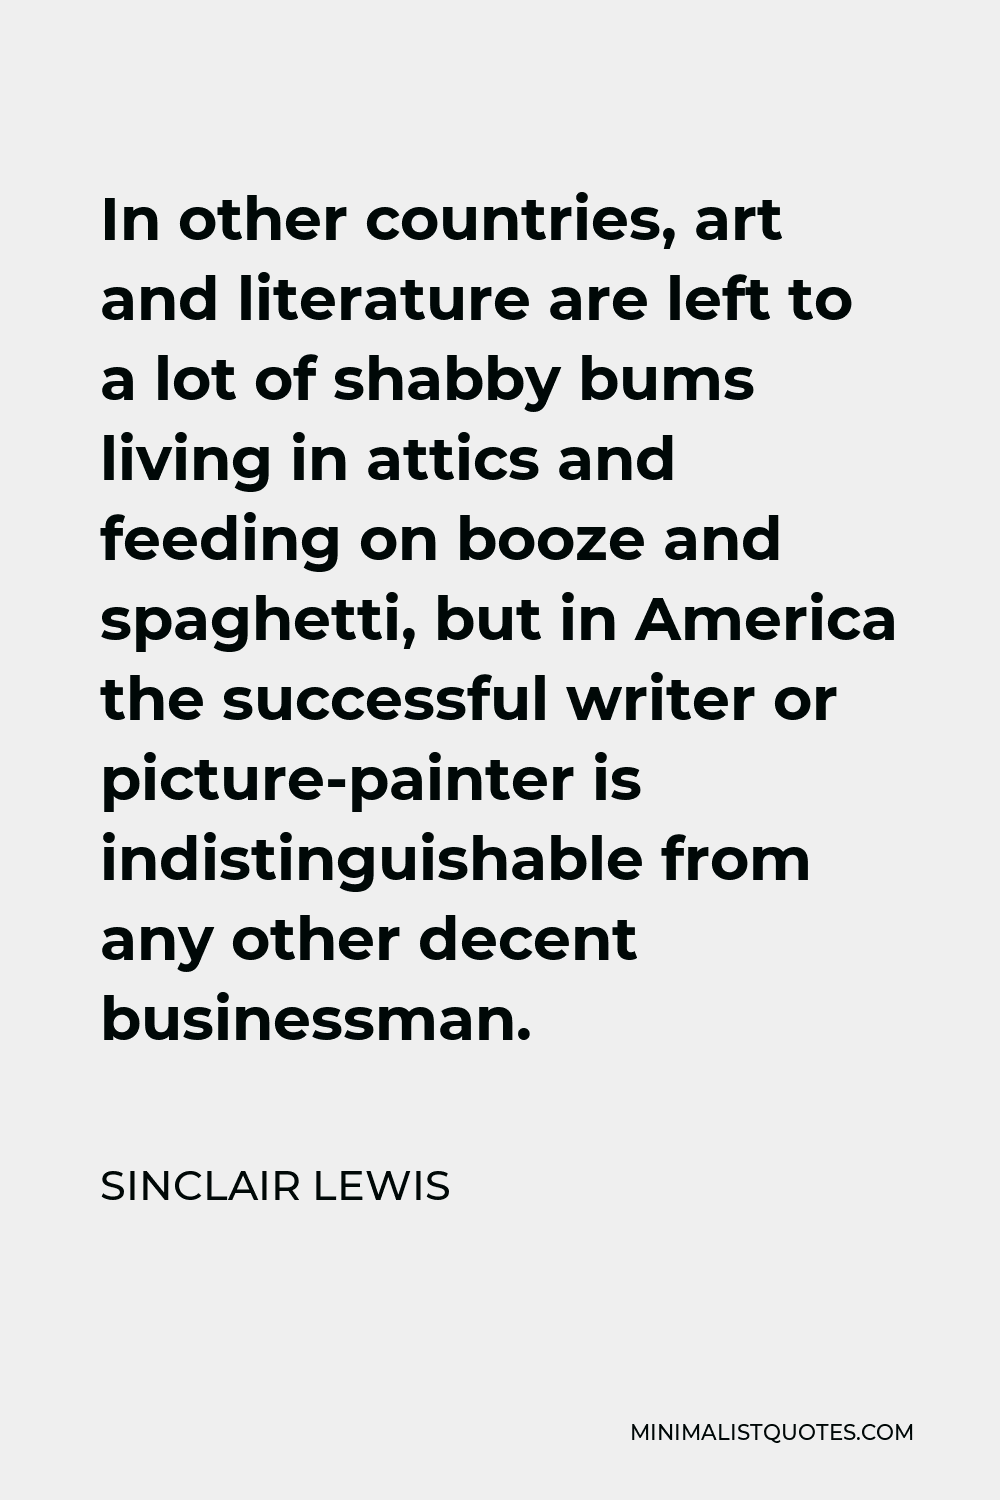 Sinclair Lewis Quote - In other countries, art and literature are left to a lot of shabby bums living in attics and feeding on booze and spaghetti, but in America the successful writer or picture-painter is indistinguishable from any other decent businessman.